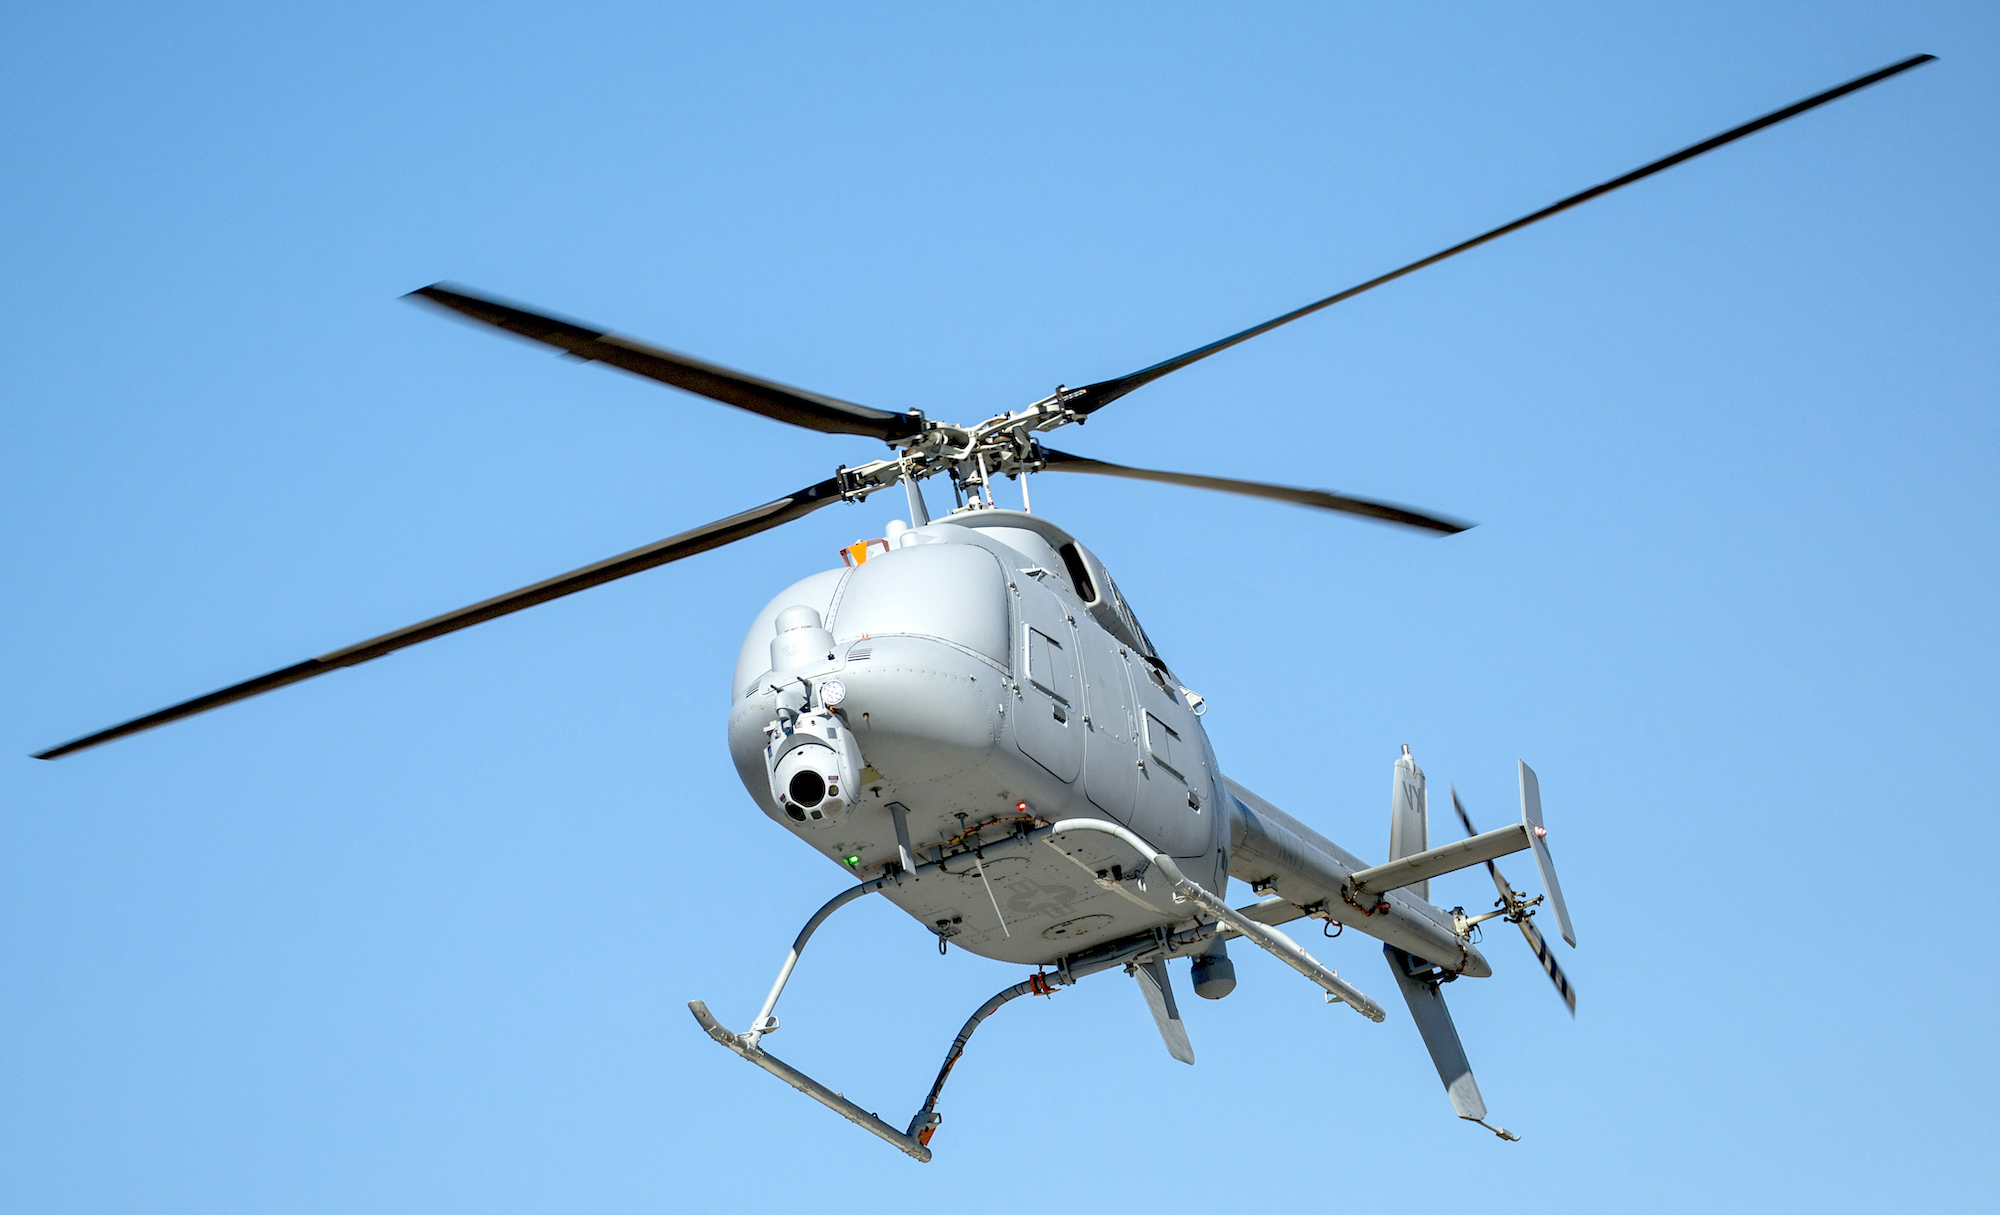 The MQ-8C Fire Scout completes a test flight November 19, 2015 at the Point Mugu Sea Range in California